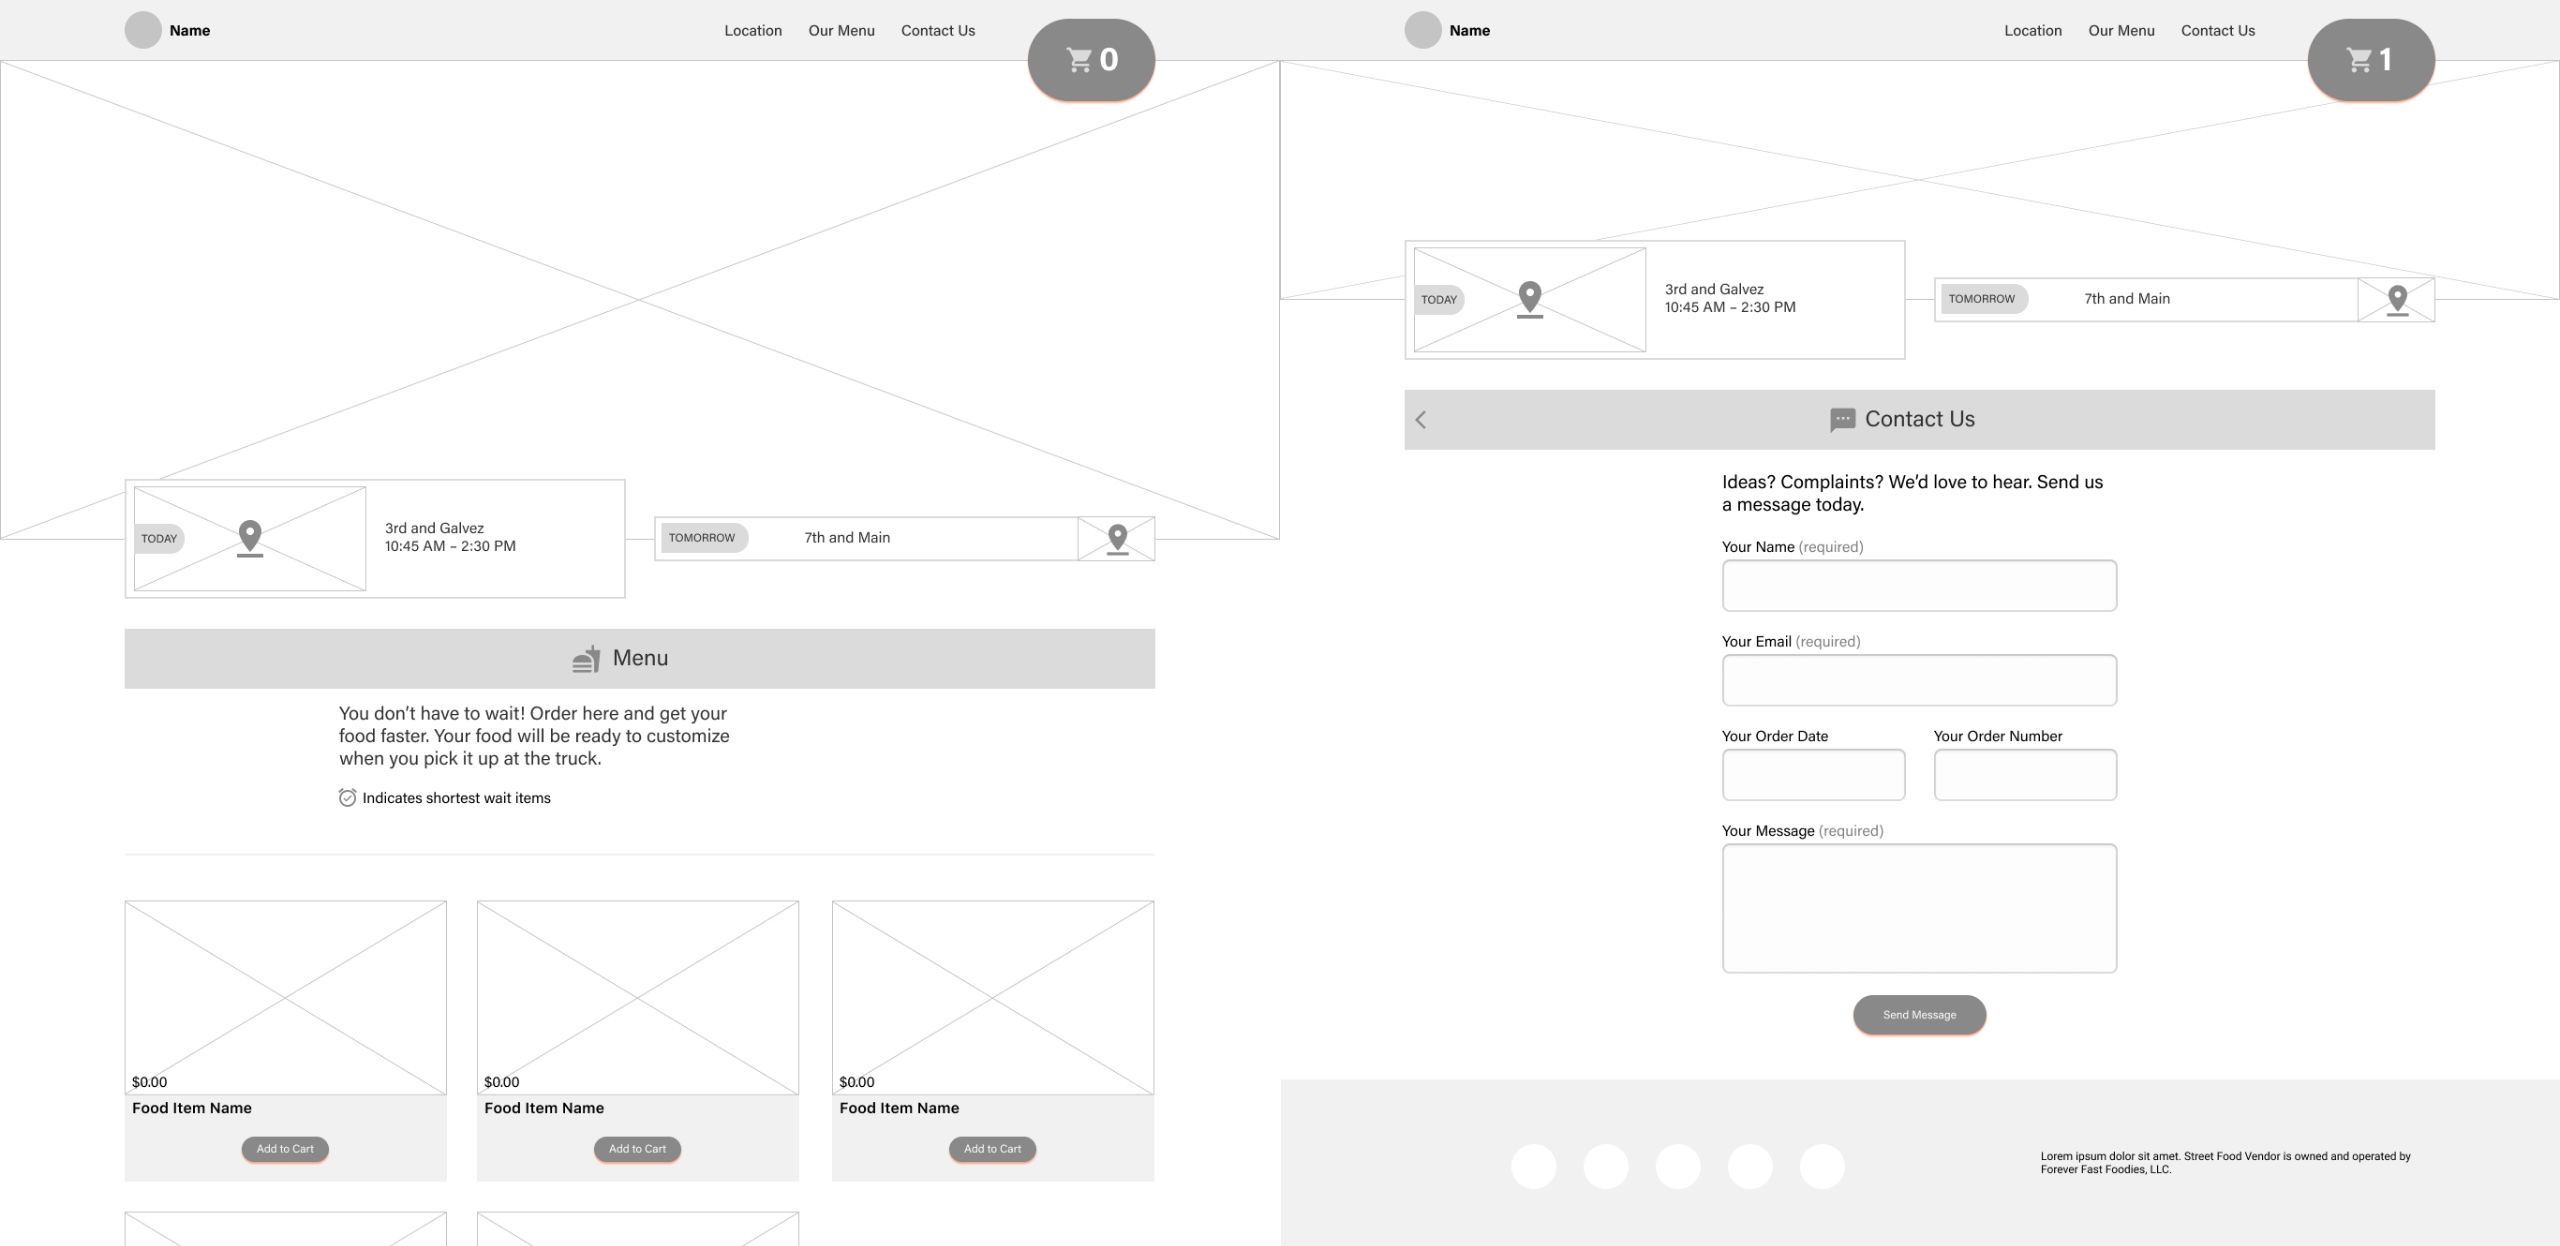 Digital wireframes for the iPad size screens for the home and contact screens.